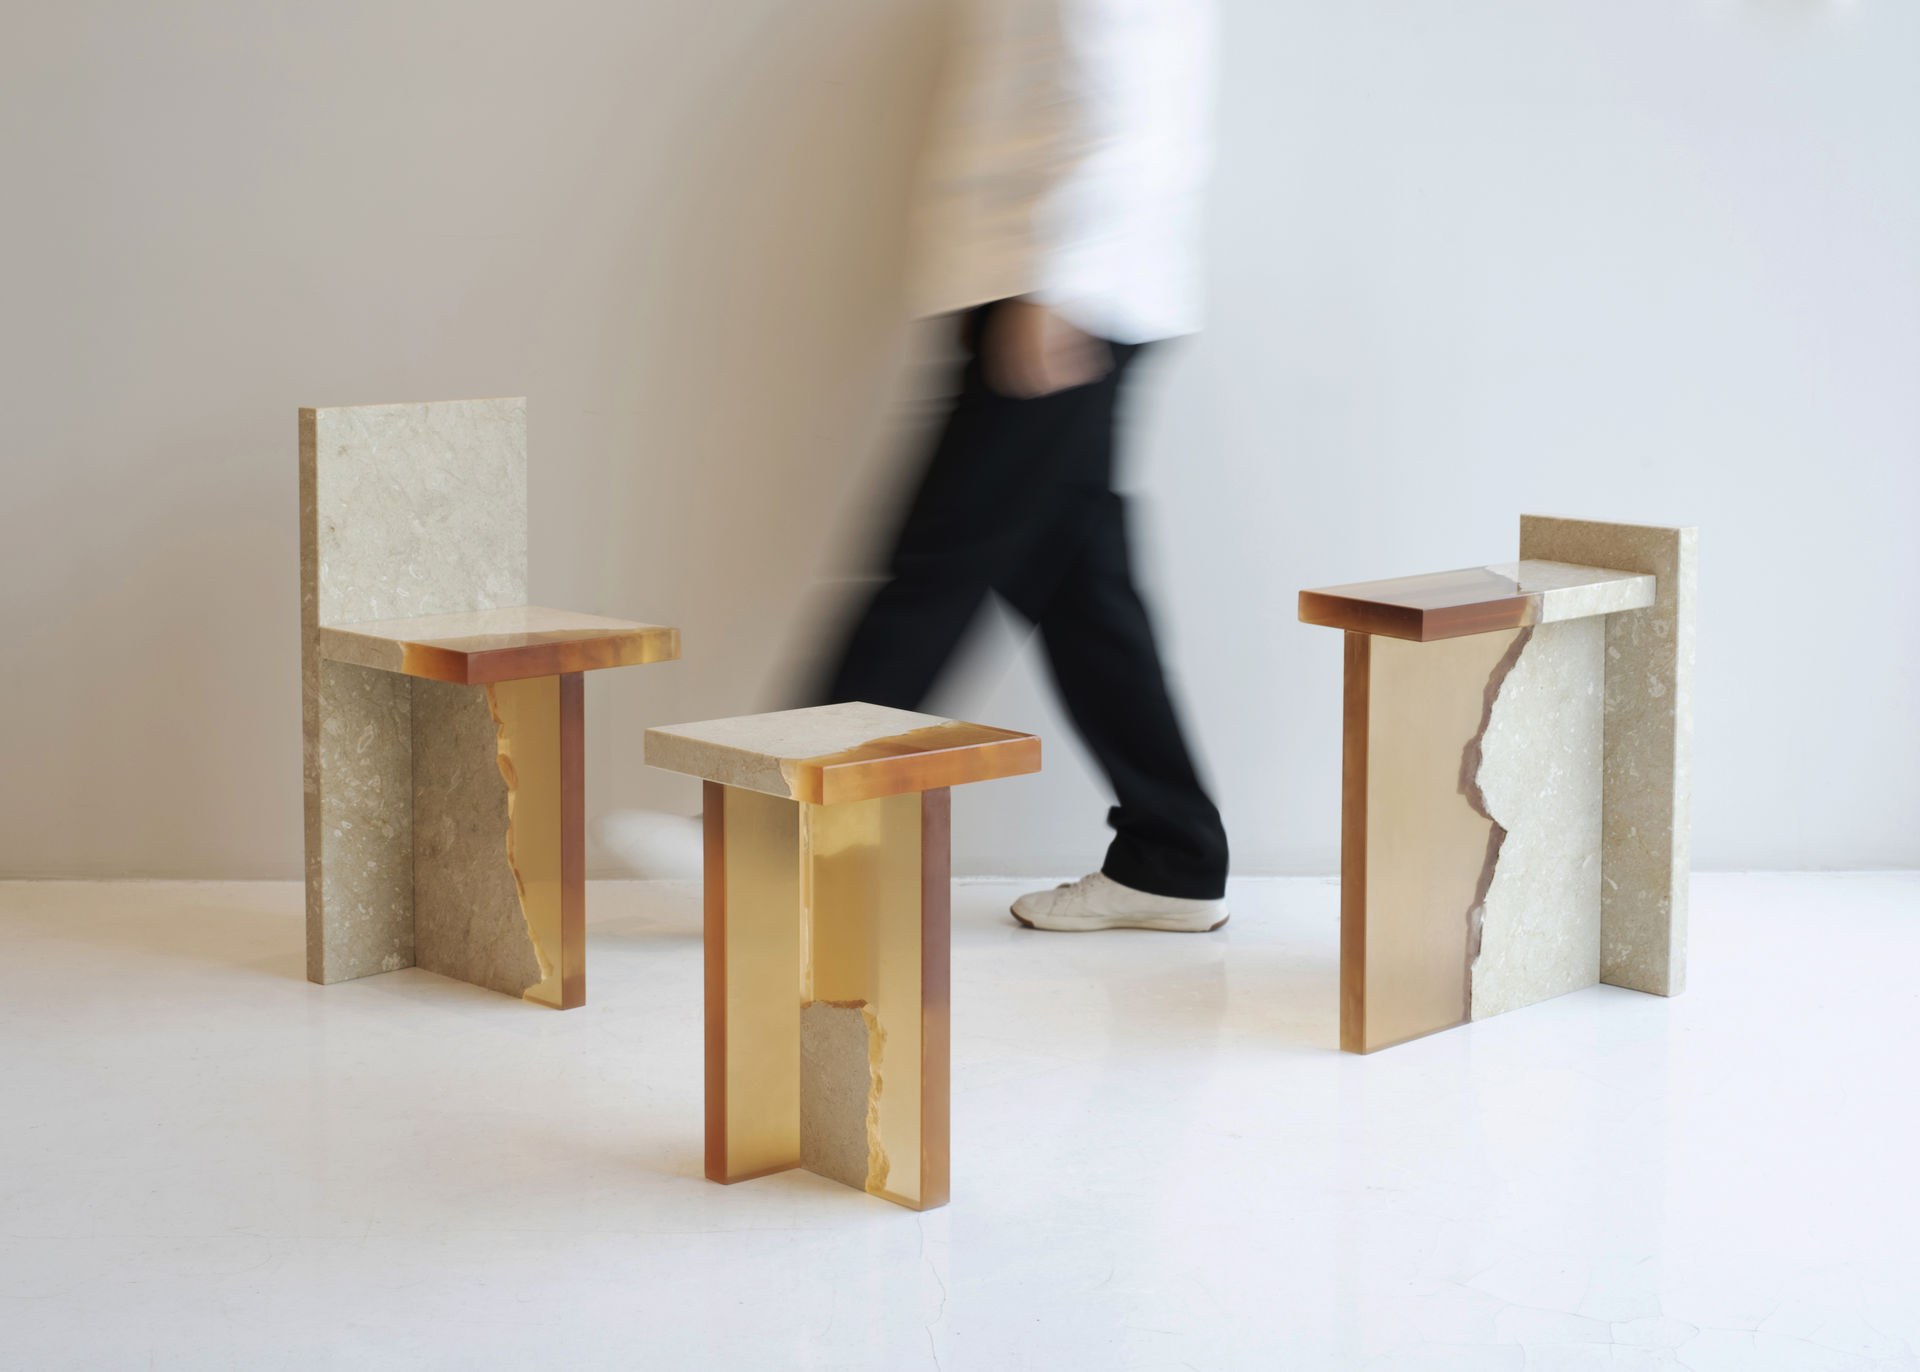 Minimalist Furniture Collection "Fragment Series" by Fict Studio